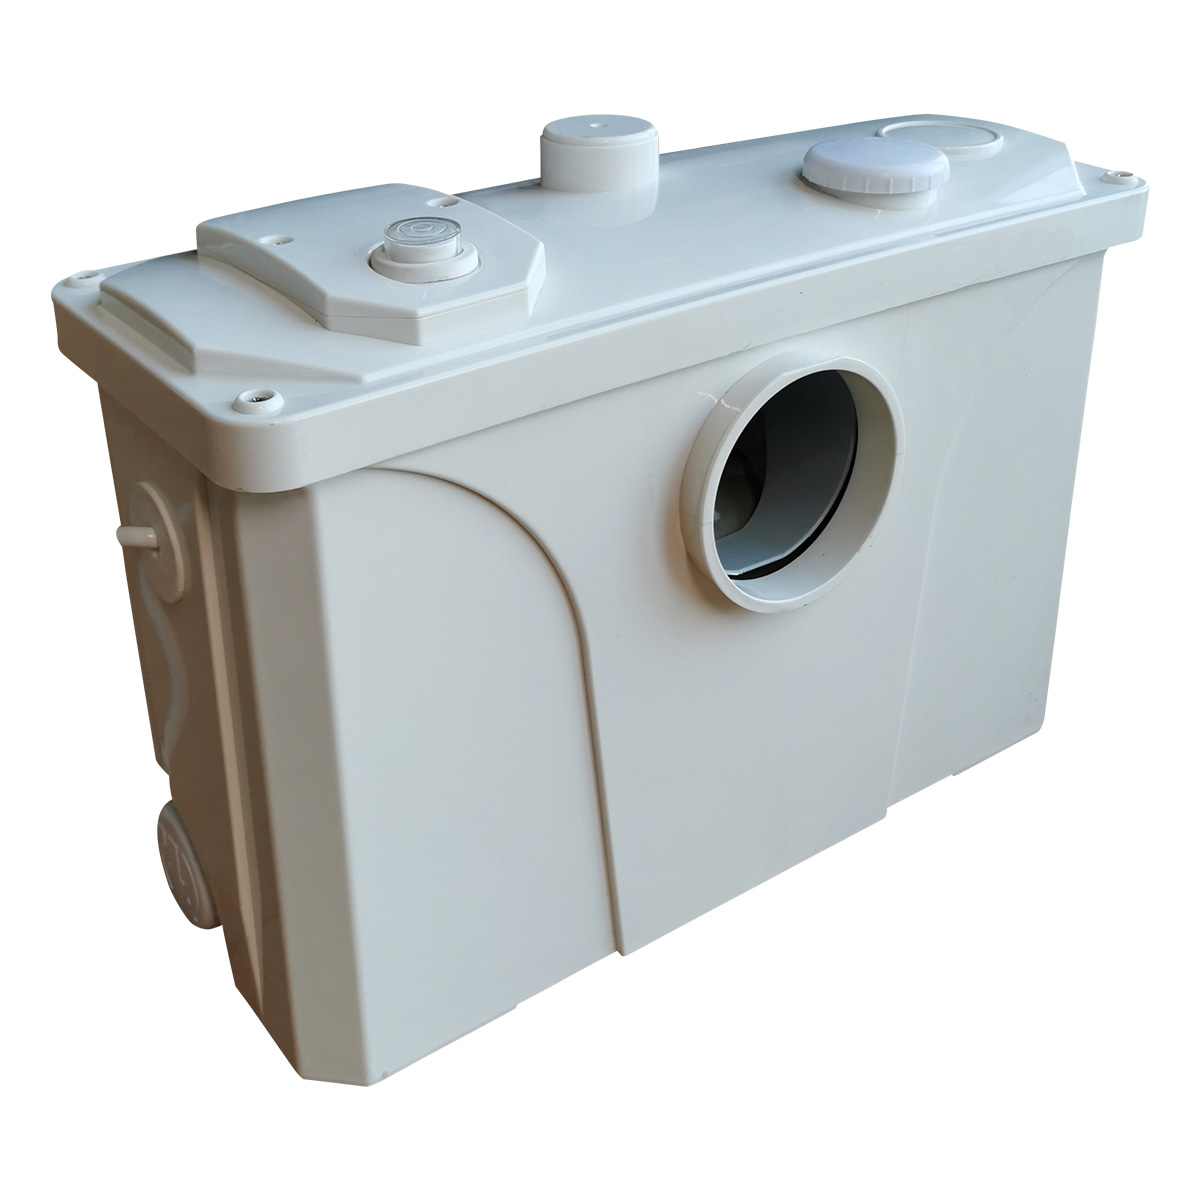 Mobility factory macerating pump FLO700 build a bathroom anywhere